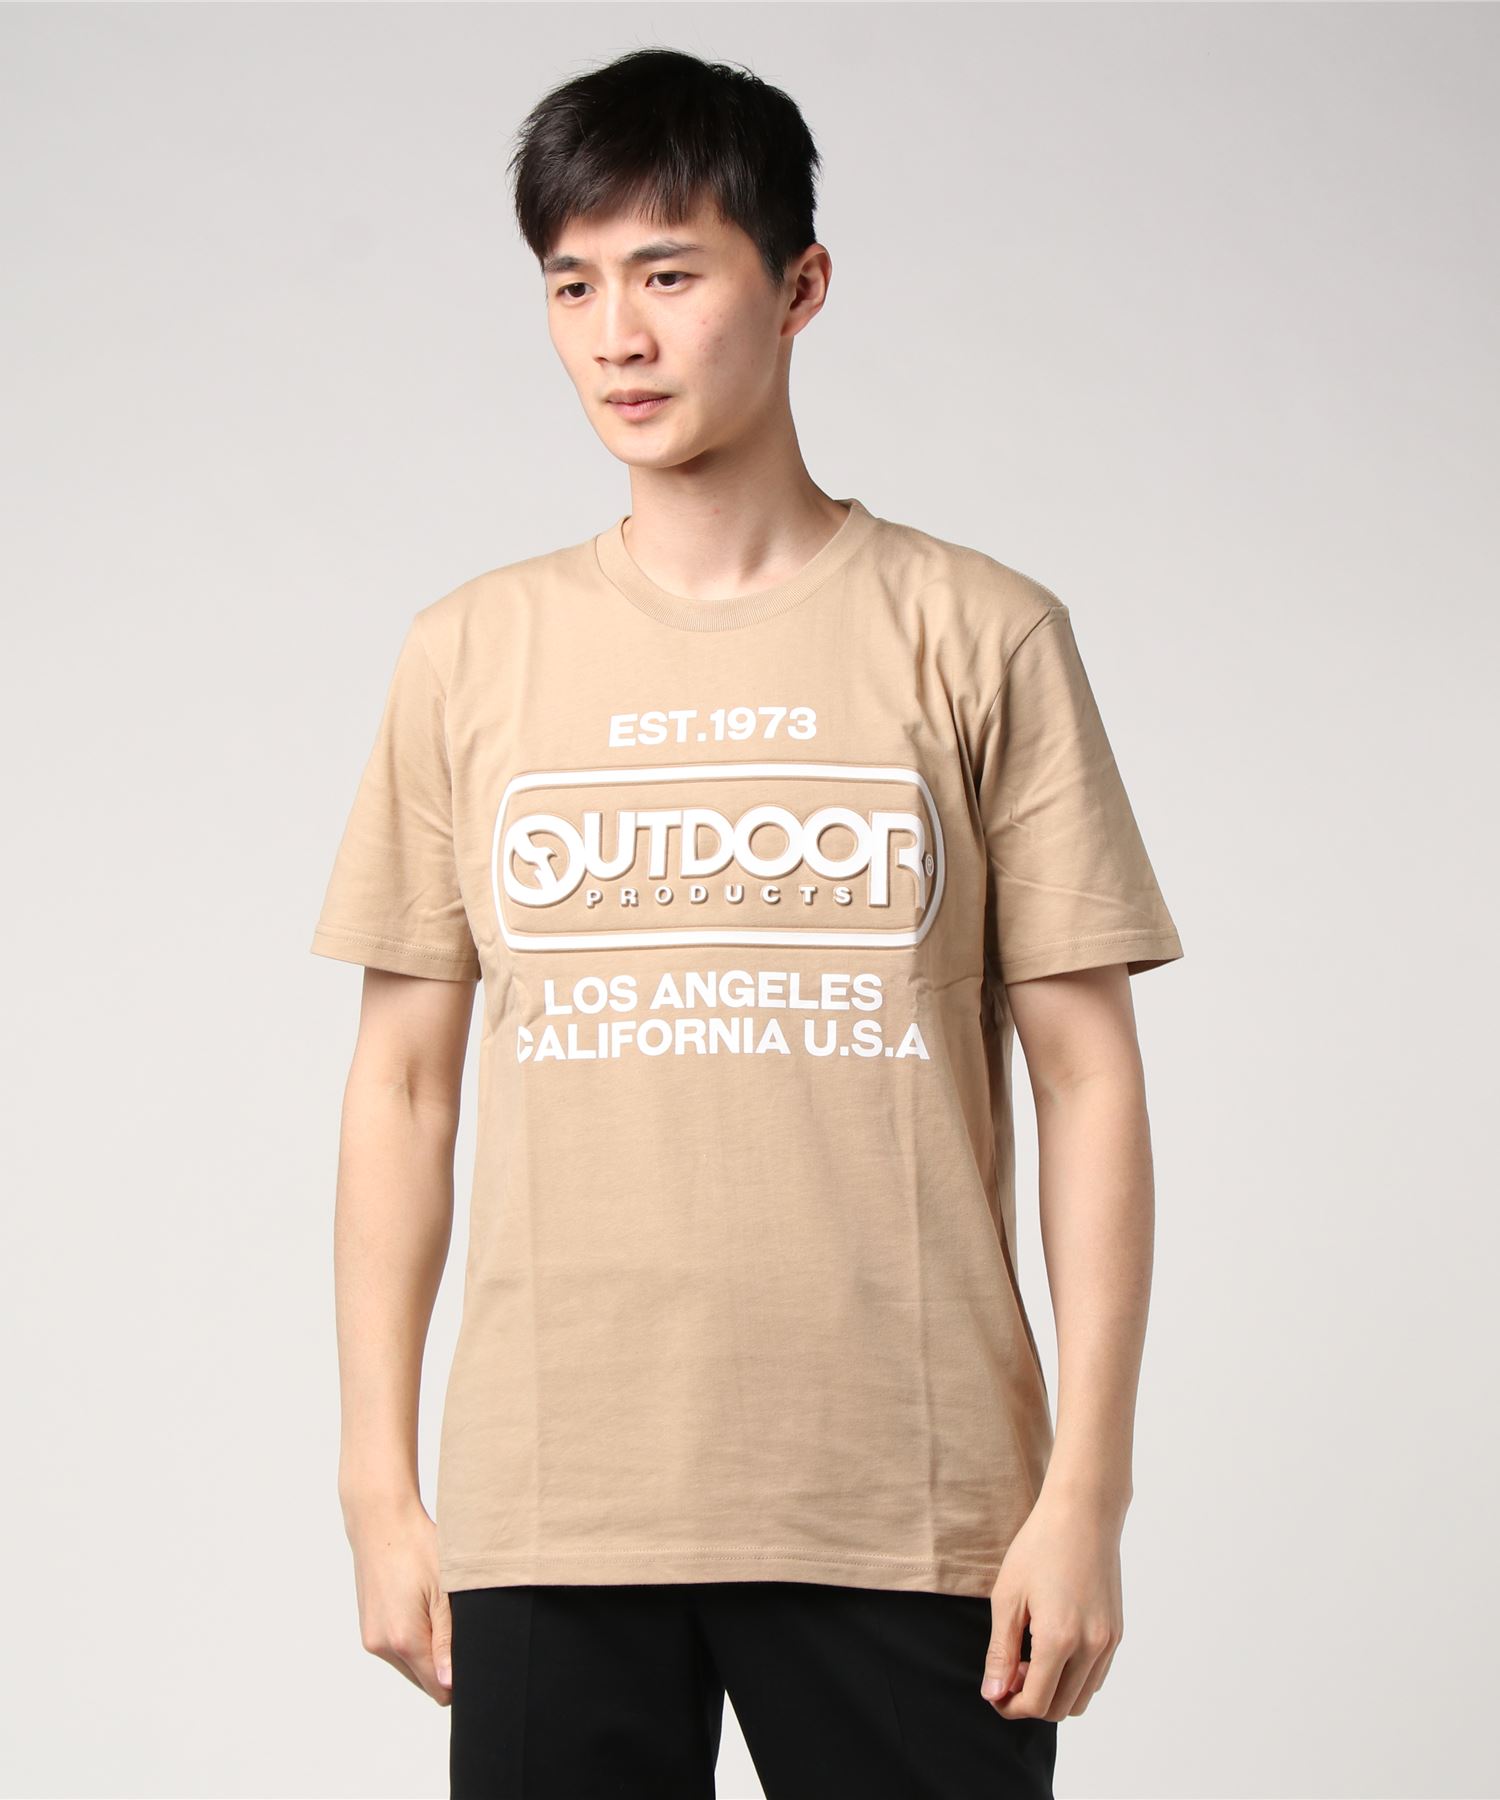 ｏｕｔｄｏｏｒ ｐｒｏｄｕｃｔｓ エンボスプリントロゴｔシャツ ブランドロゴ ビッグロゴプリント Outdoor Products Apparel アウトドアプロダクツ Outdoor Products 公式通販サイト